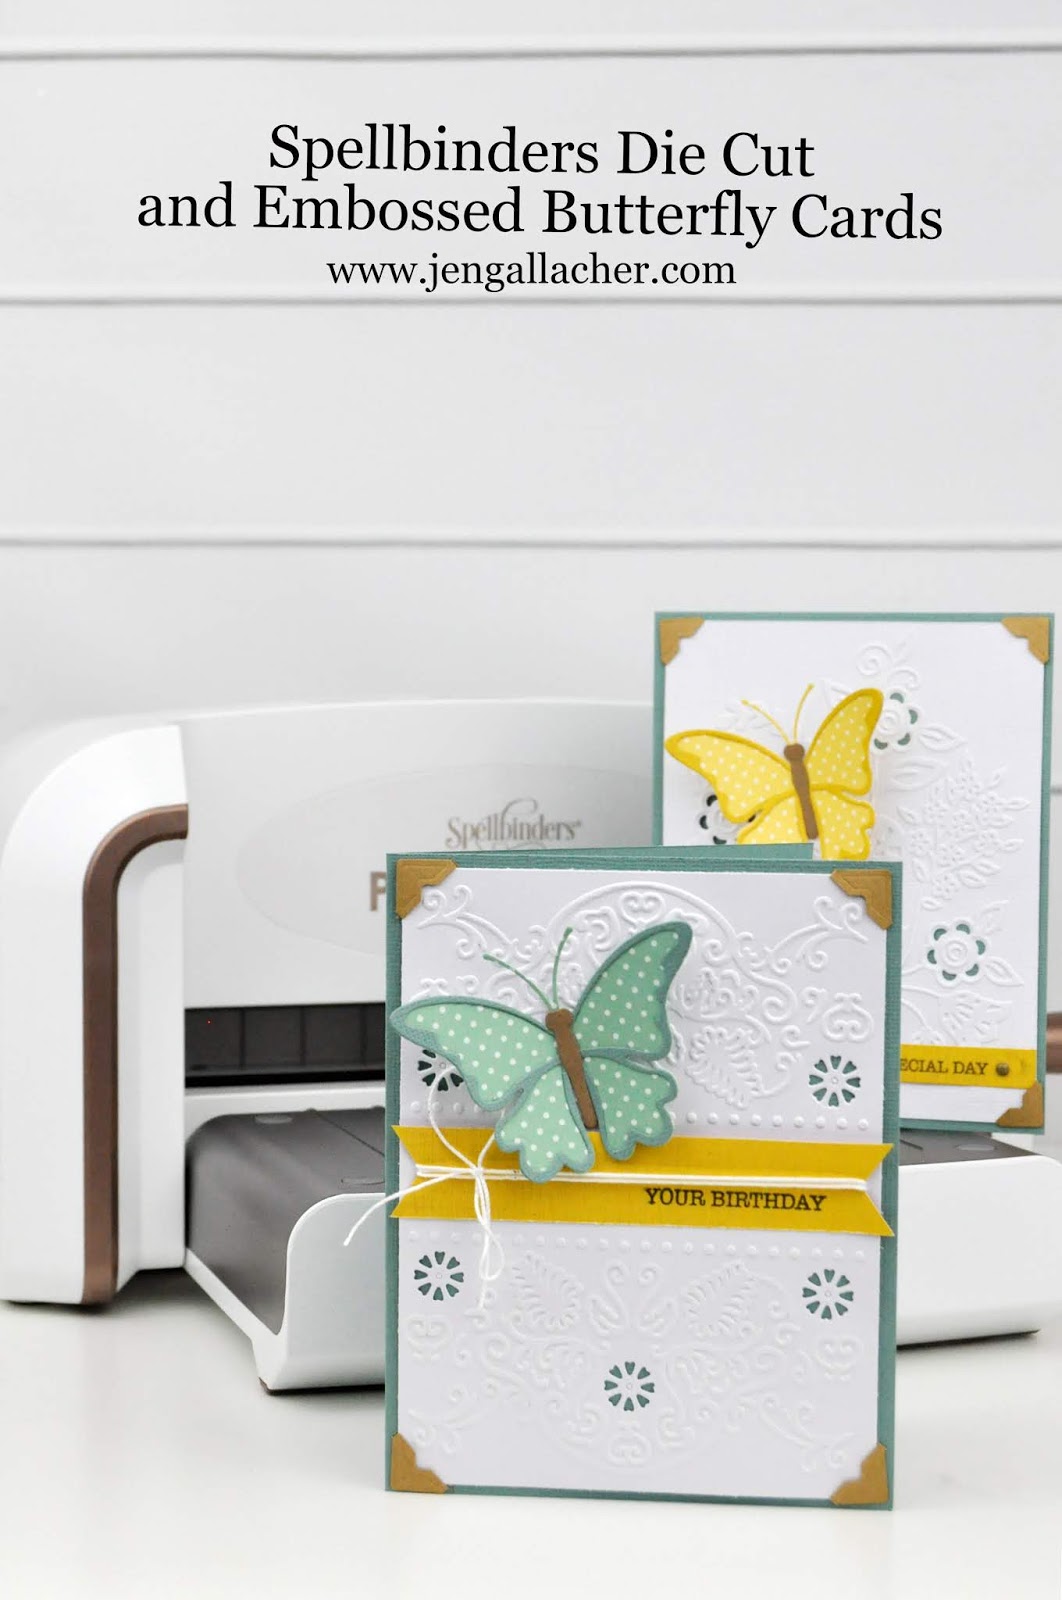 Spellbinders Emboss and Die Cut Folders tutorial by Jen Gallacher featuring the Spellbinders Platinum machine and dies and stamps from Spellbinders. #embossingfolder #diecutting #spellbinders #jengallacher